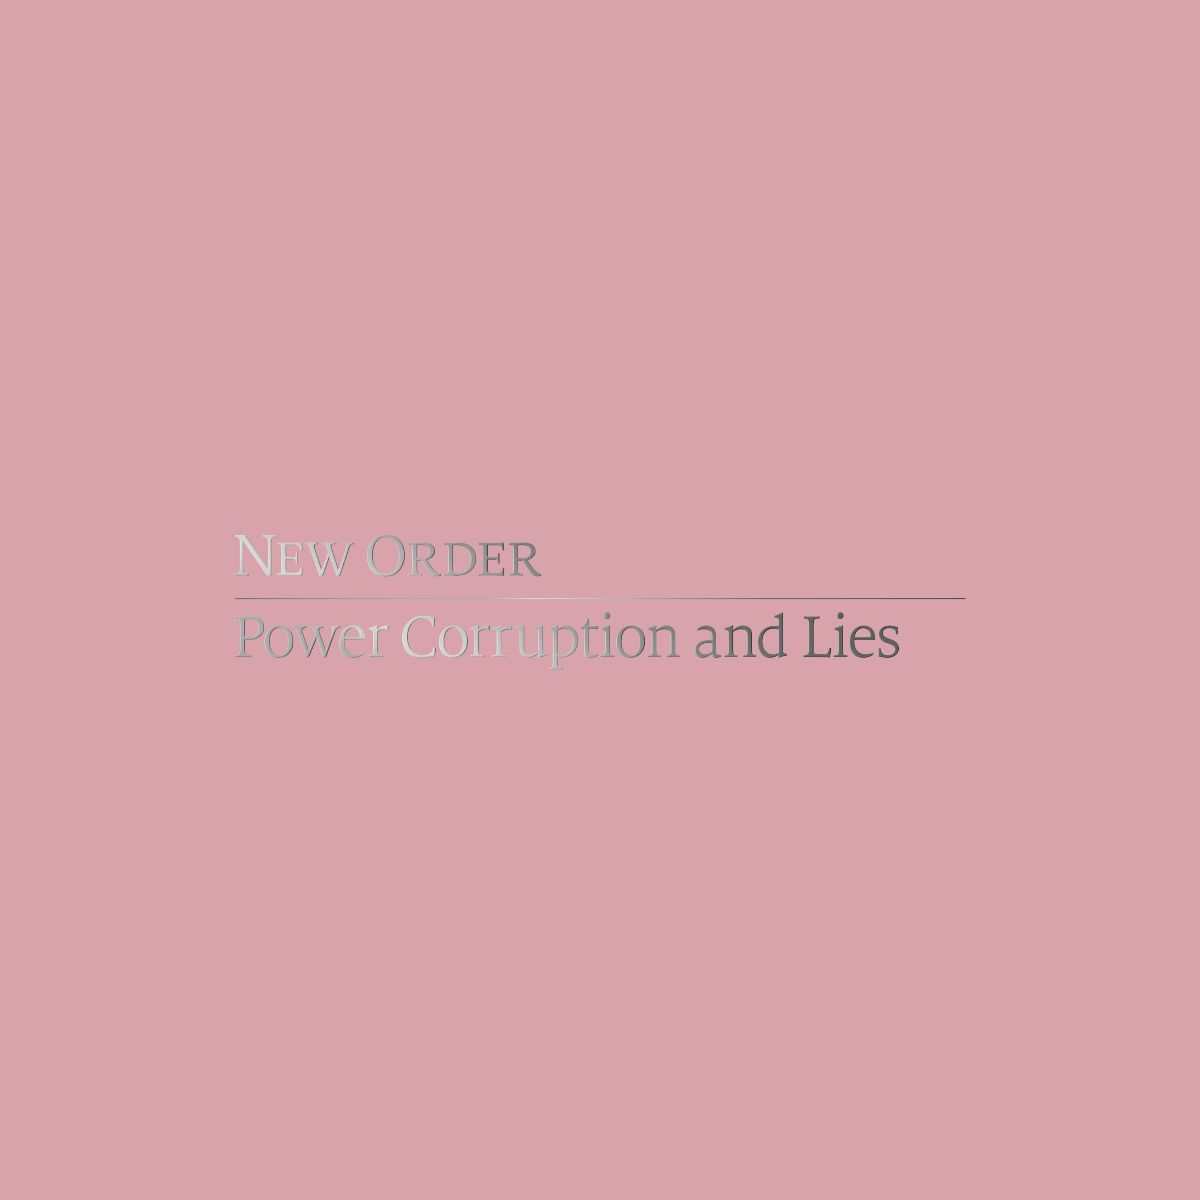 DVD/Blu-ray-Review: New Order - Power, Corruption & Lies - 2020 Definitive Edition